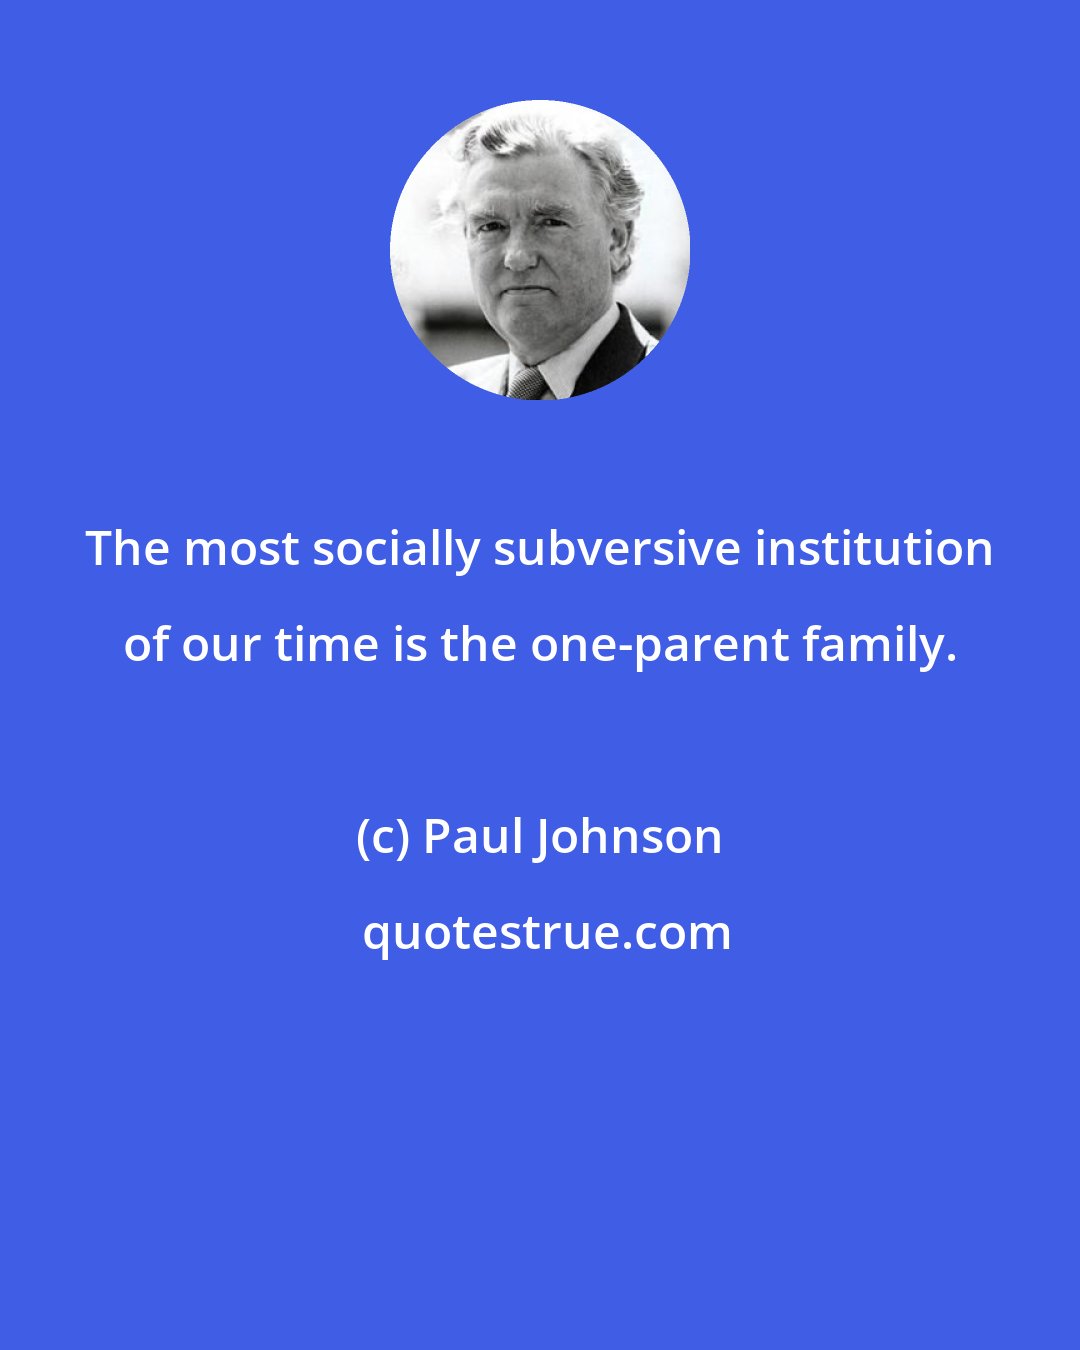 Paul Johnson: The most socially subversive institution of our time is the one-parent family.